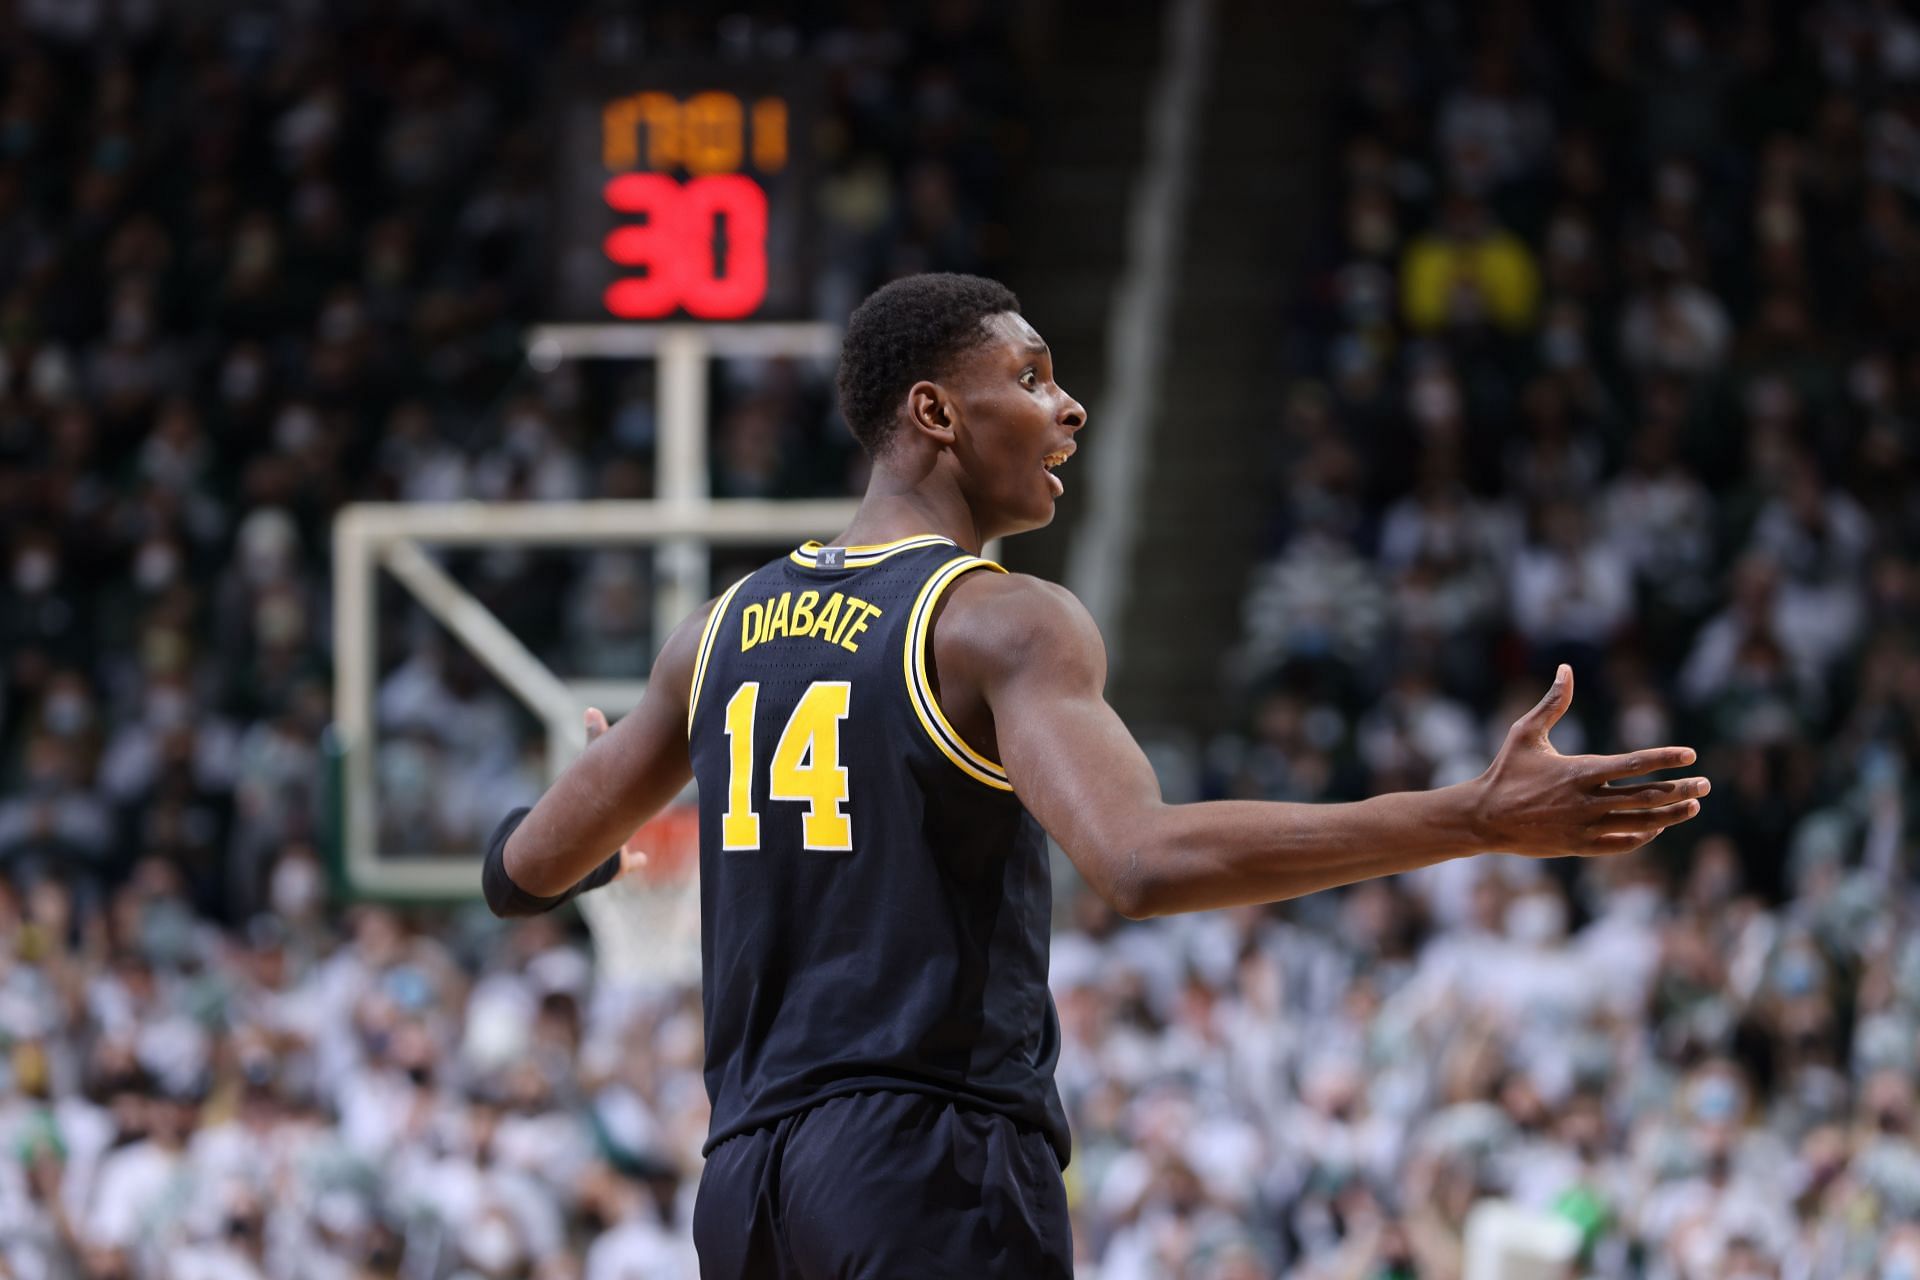 Moussa Diabate of the Michigan Wolverines was selected by the Clippers with the 43rd pick in the 2022 draft.